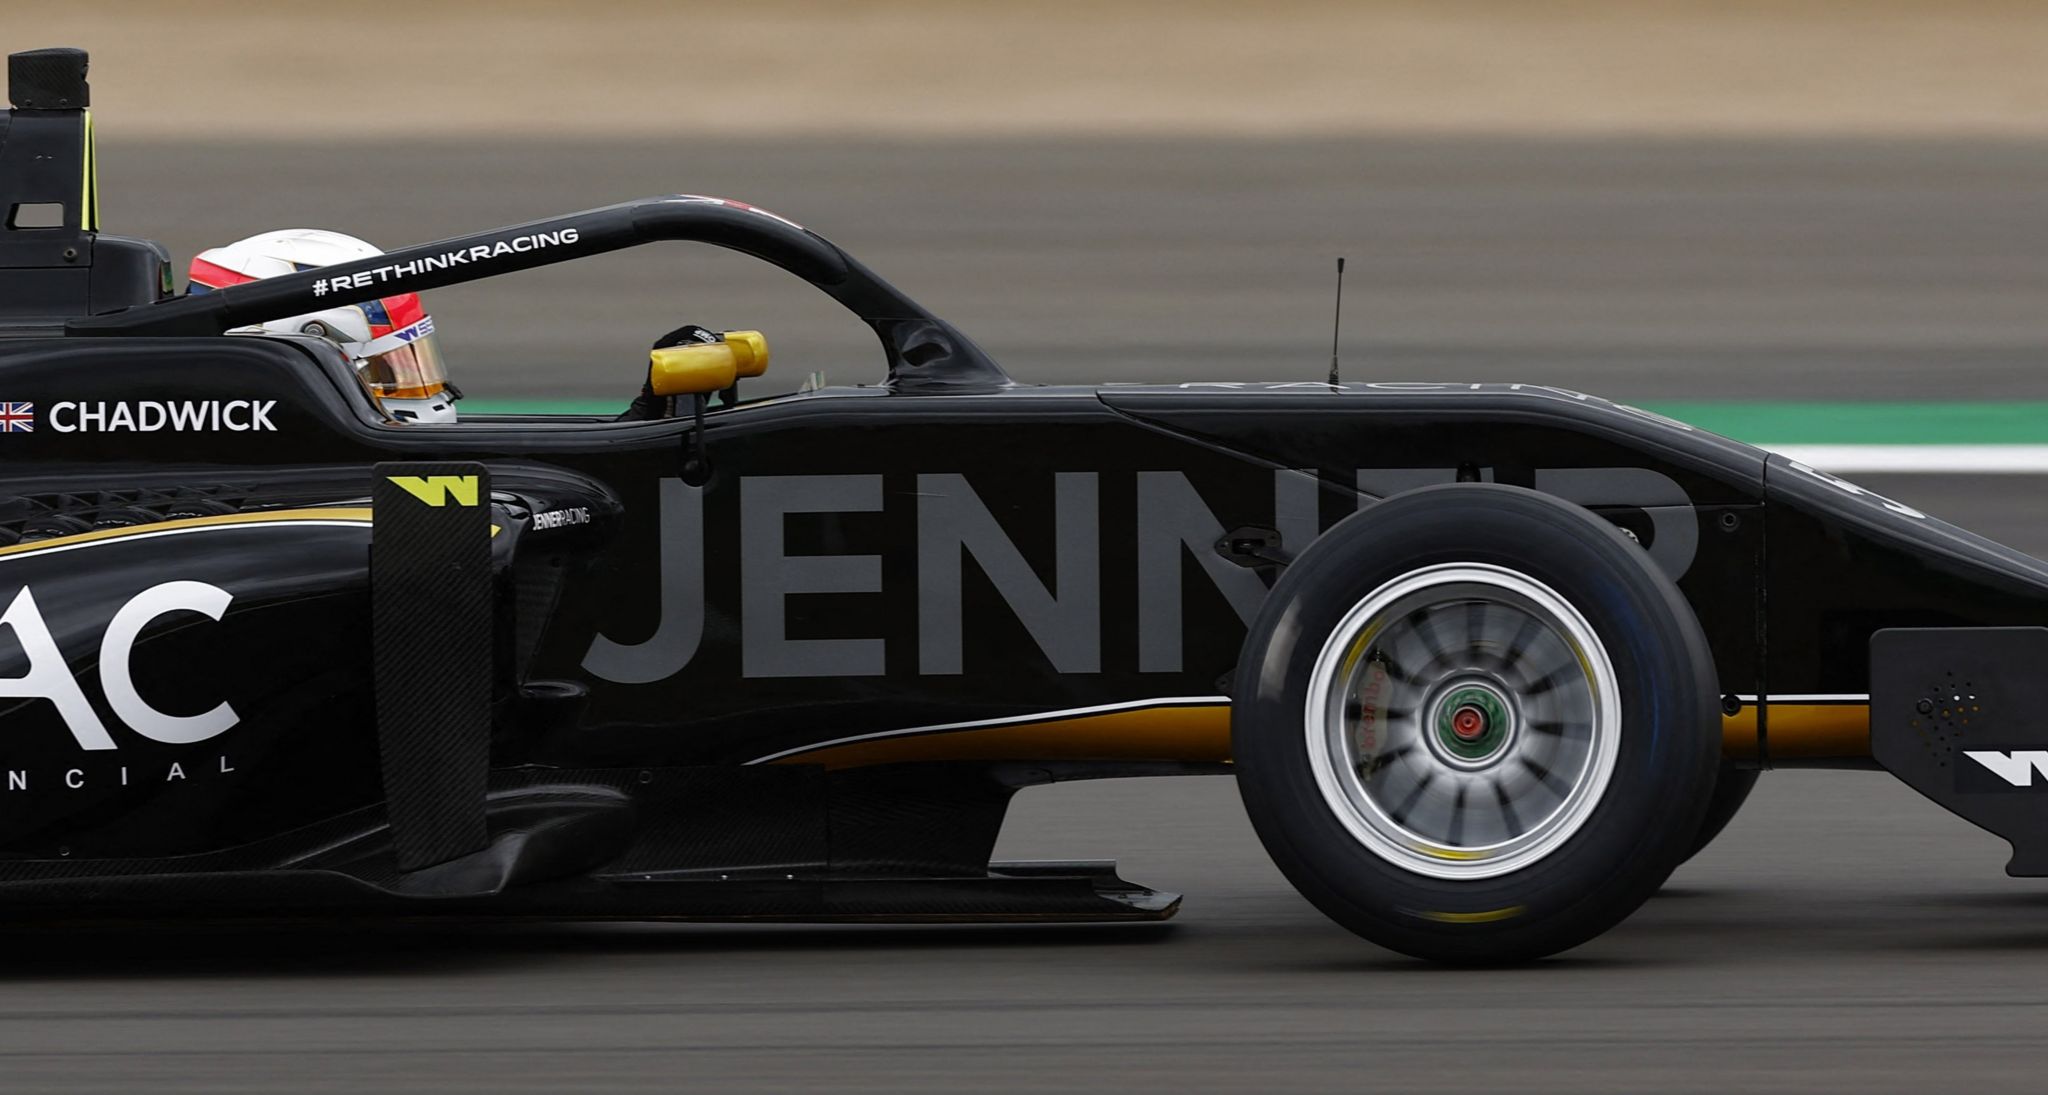 Side view of a black F1 racing car with the halo device